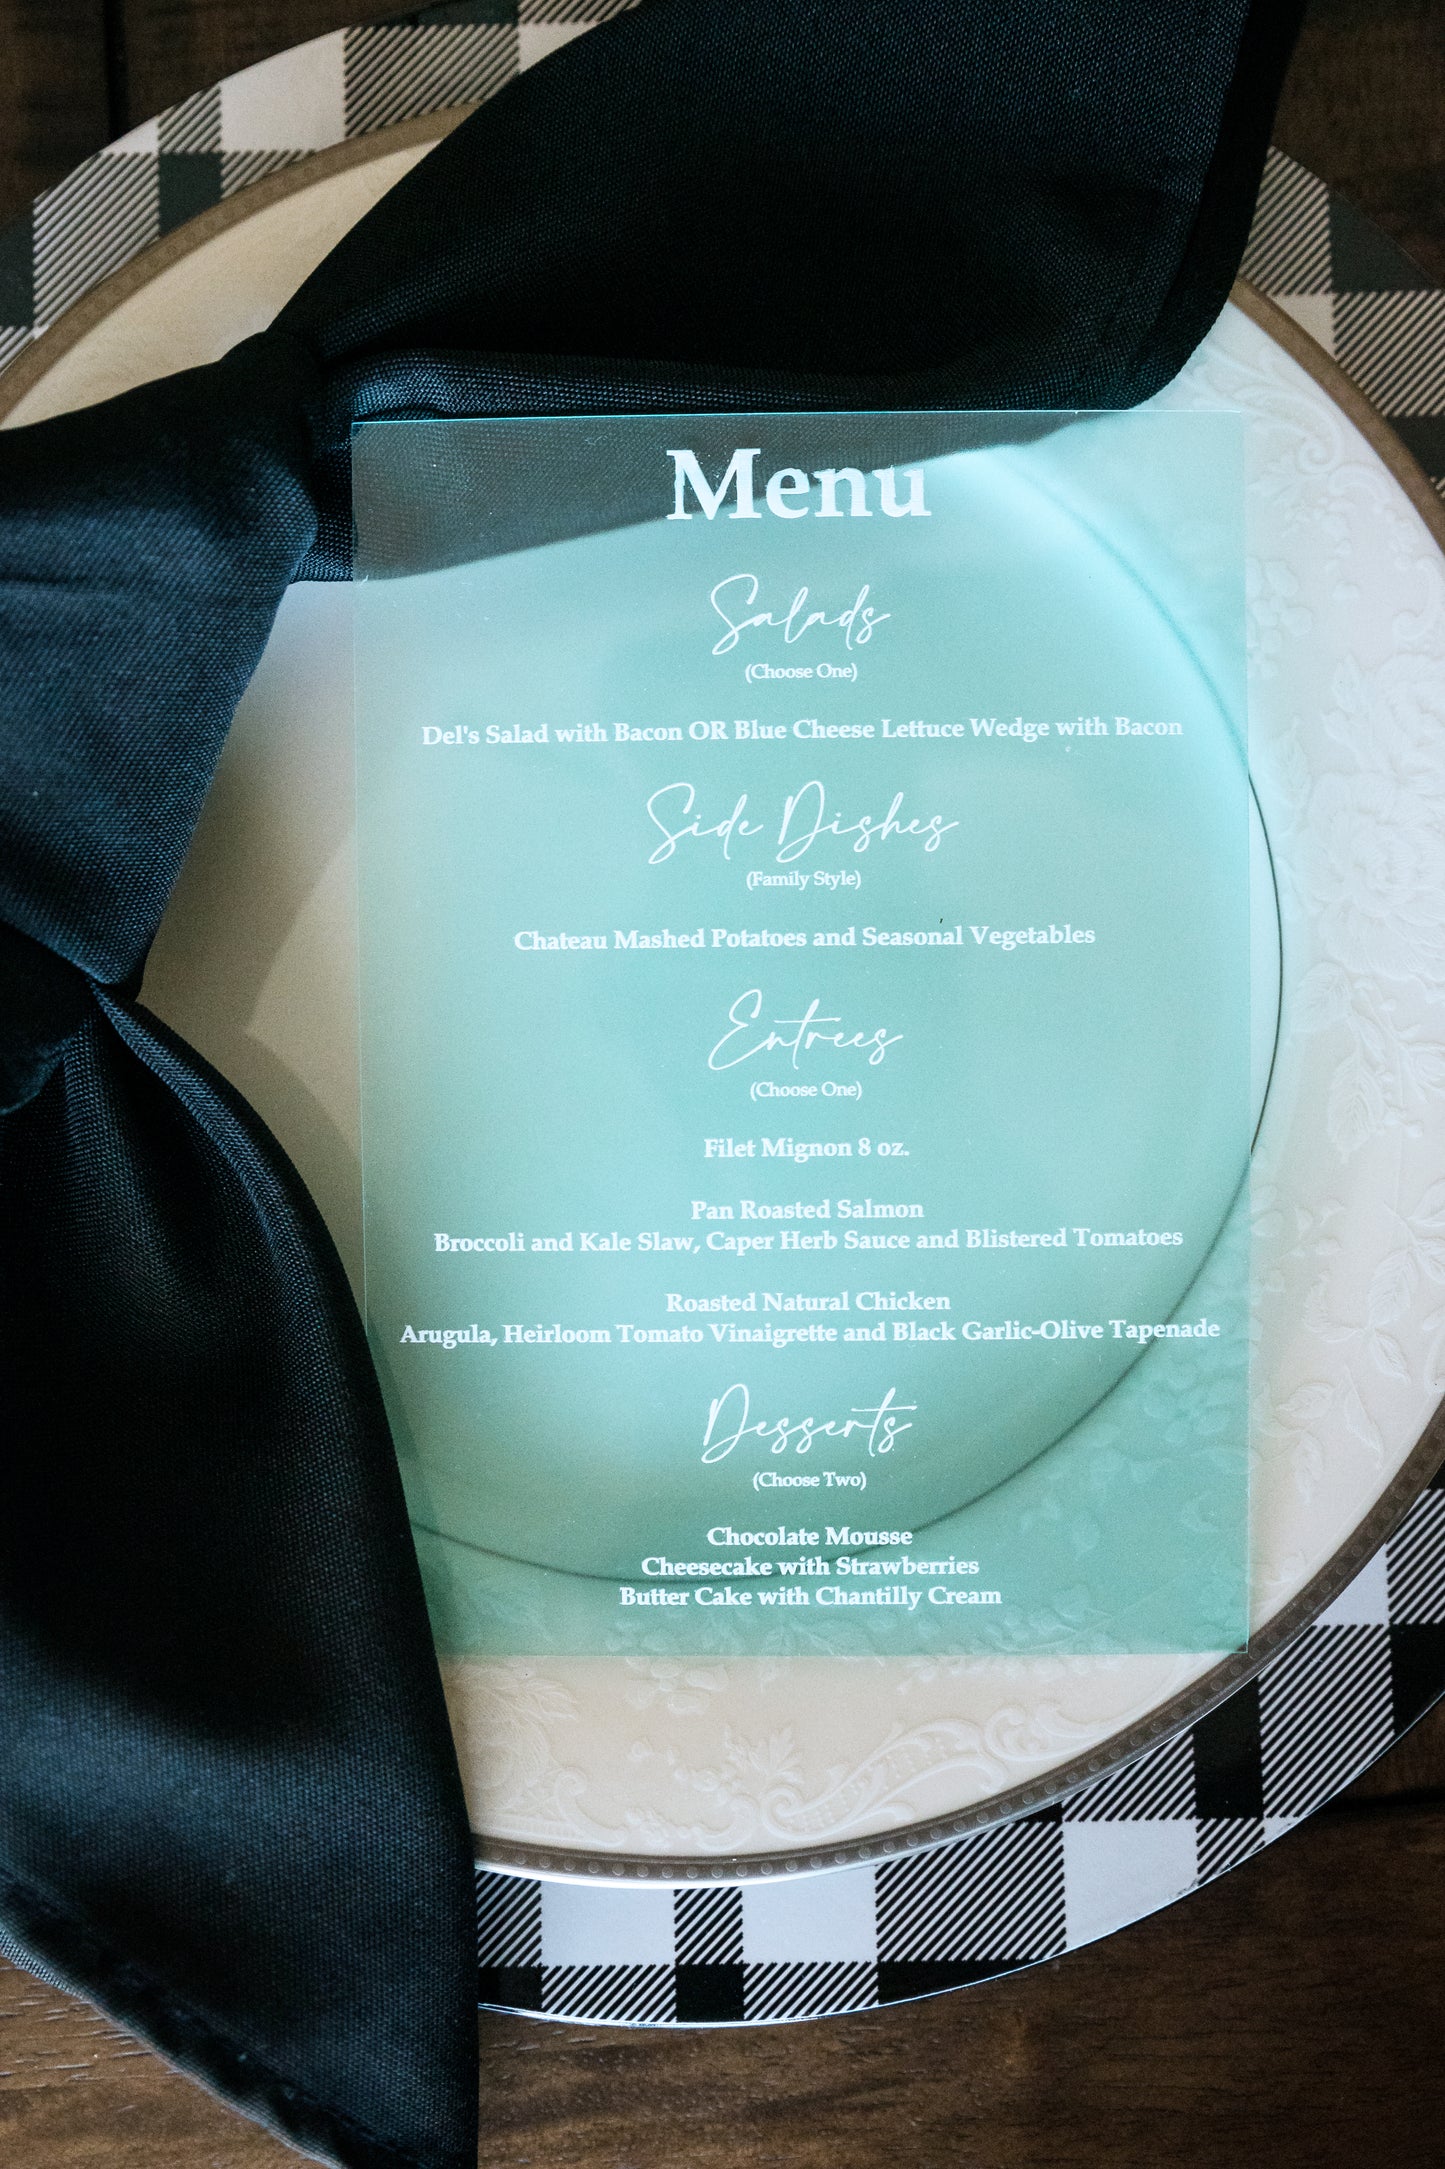 High Quality Acrylic Menus for Corporate Events and Galas